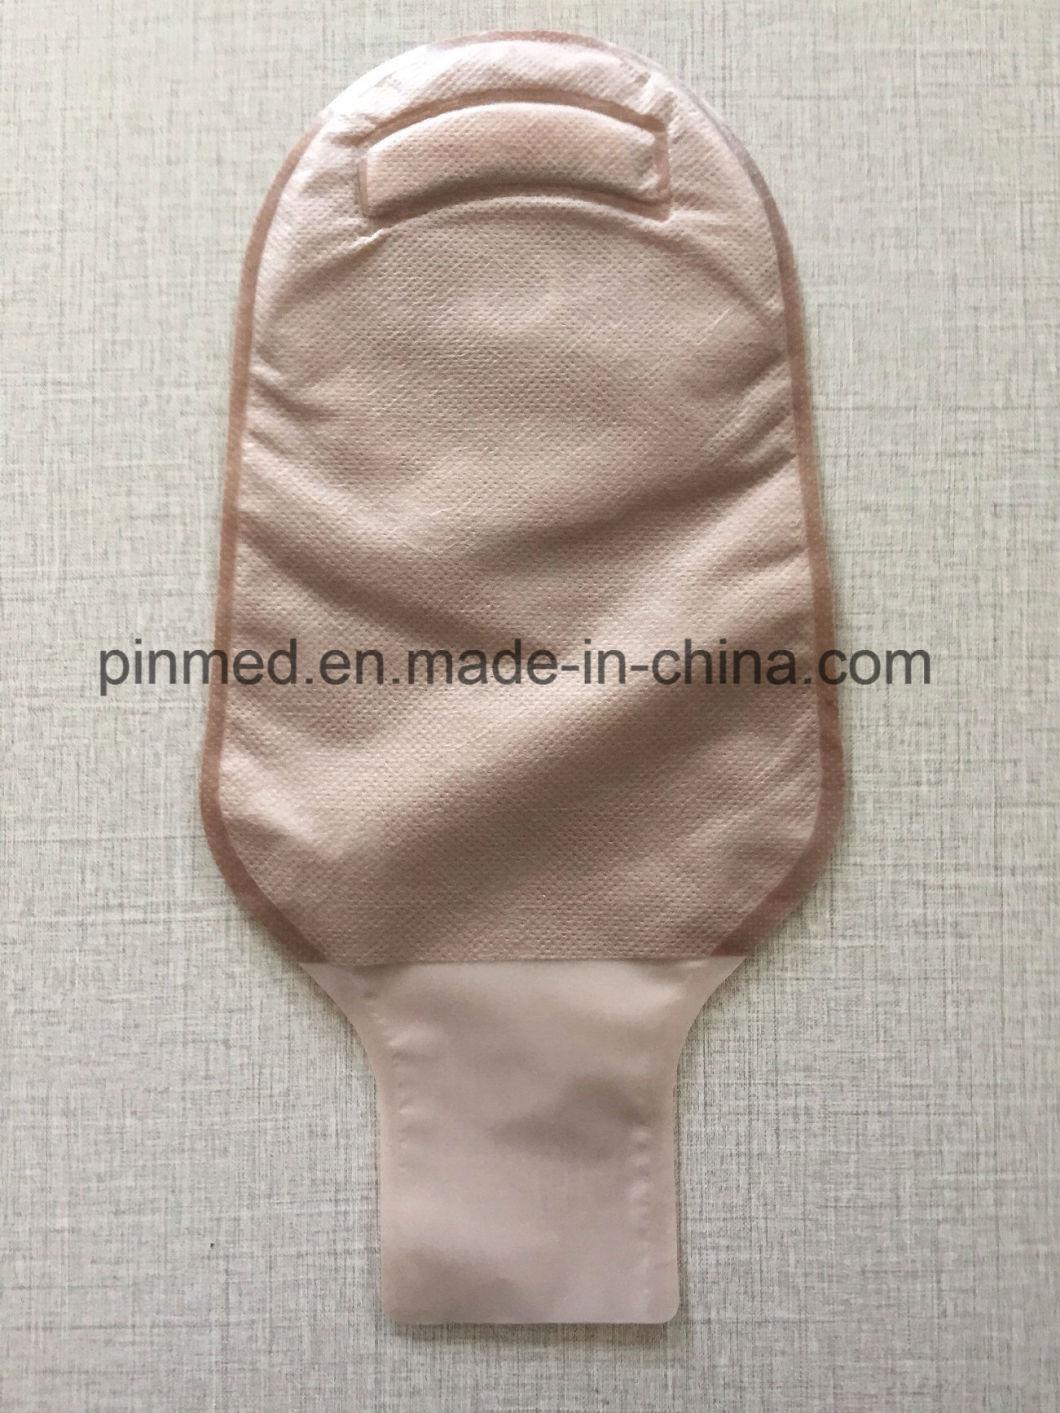 Medical Hospitals and Clinics Using Urostomy Bag for Adult or Children